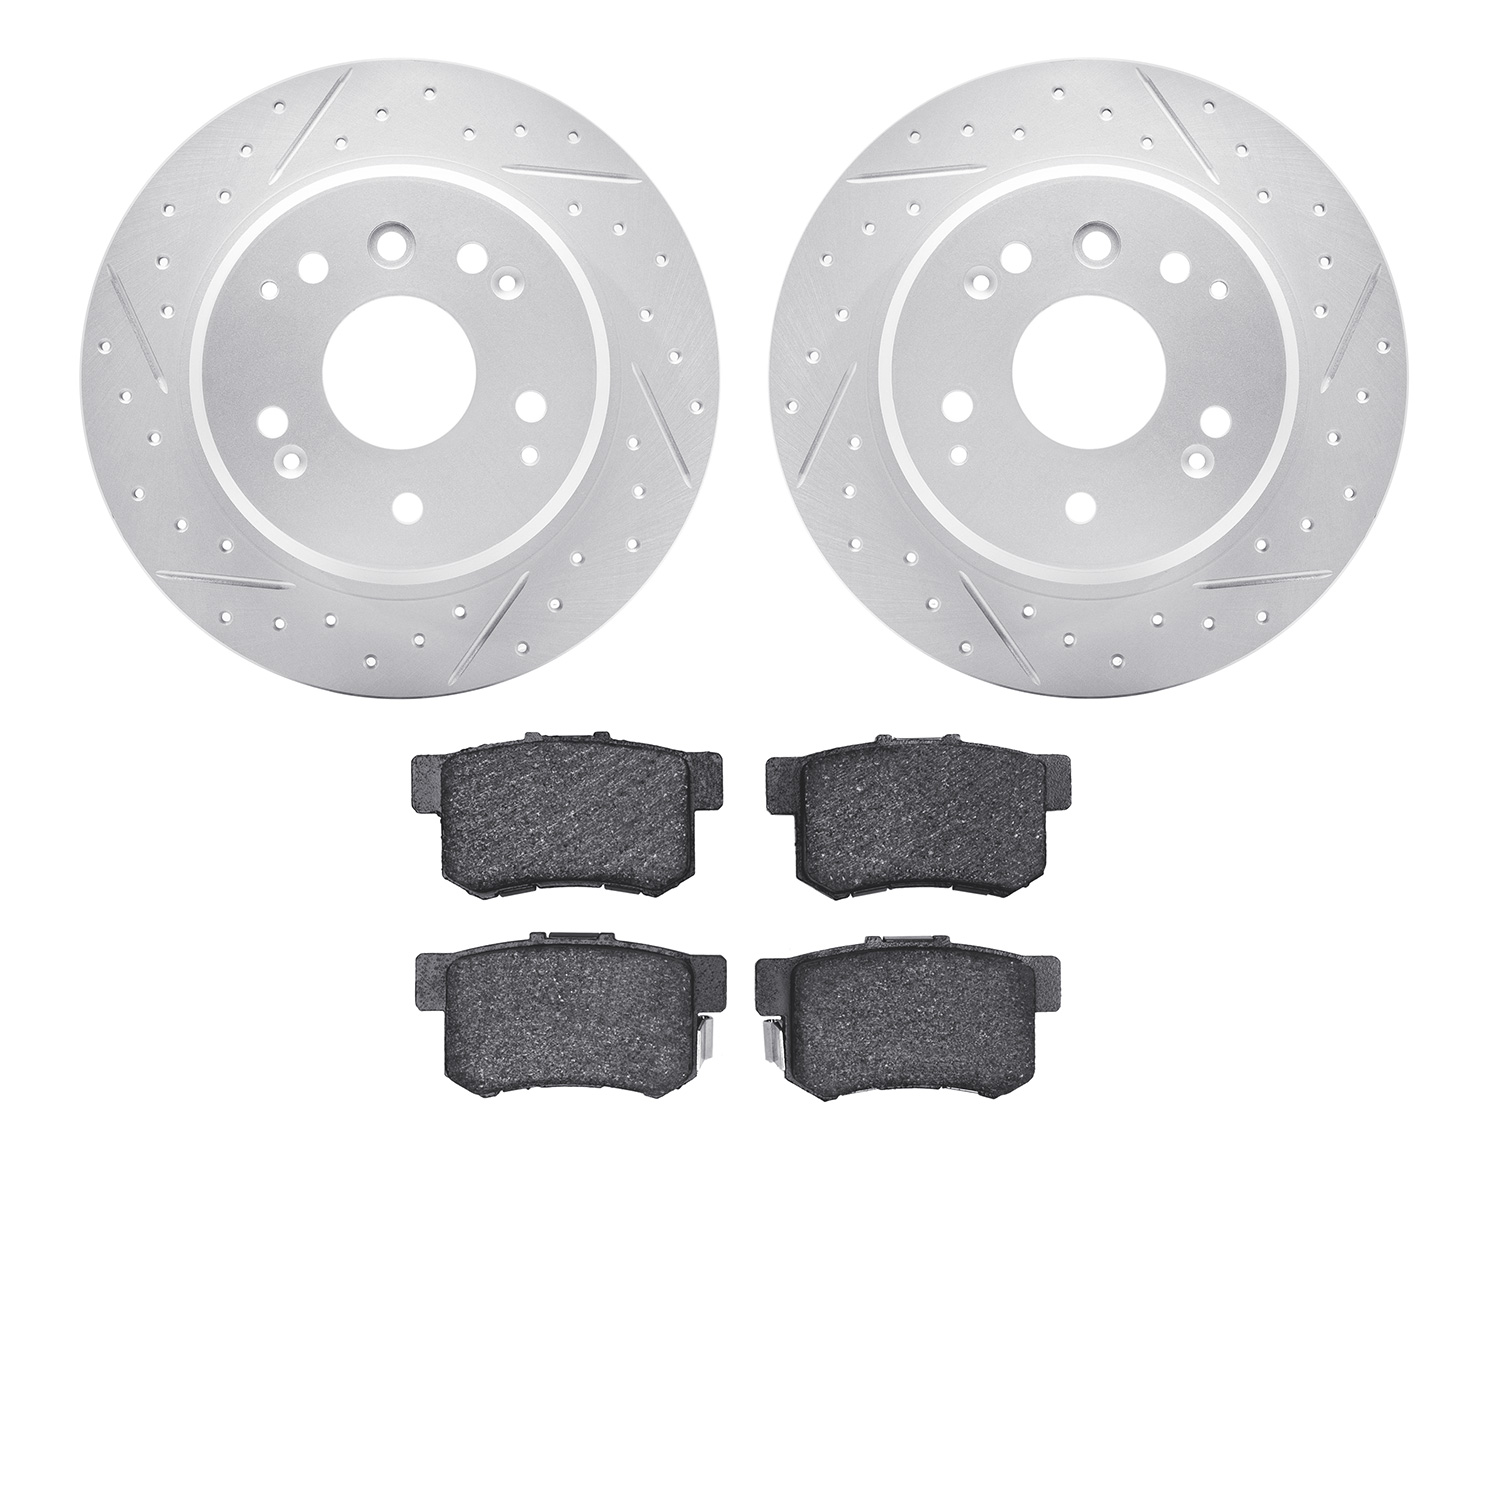 2502-58012 Geoperformance Drilled/Slotted Rotors w/5000 Advanced Brake Pads Kit, 2003-2011 Acura/Honda, Position: Rear